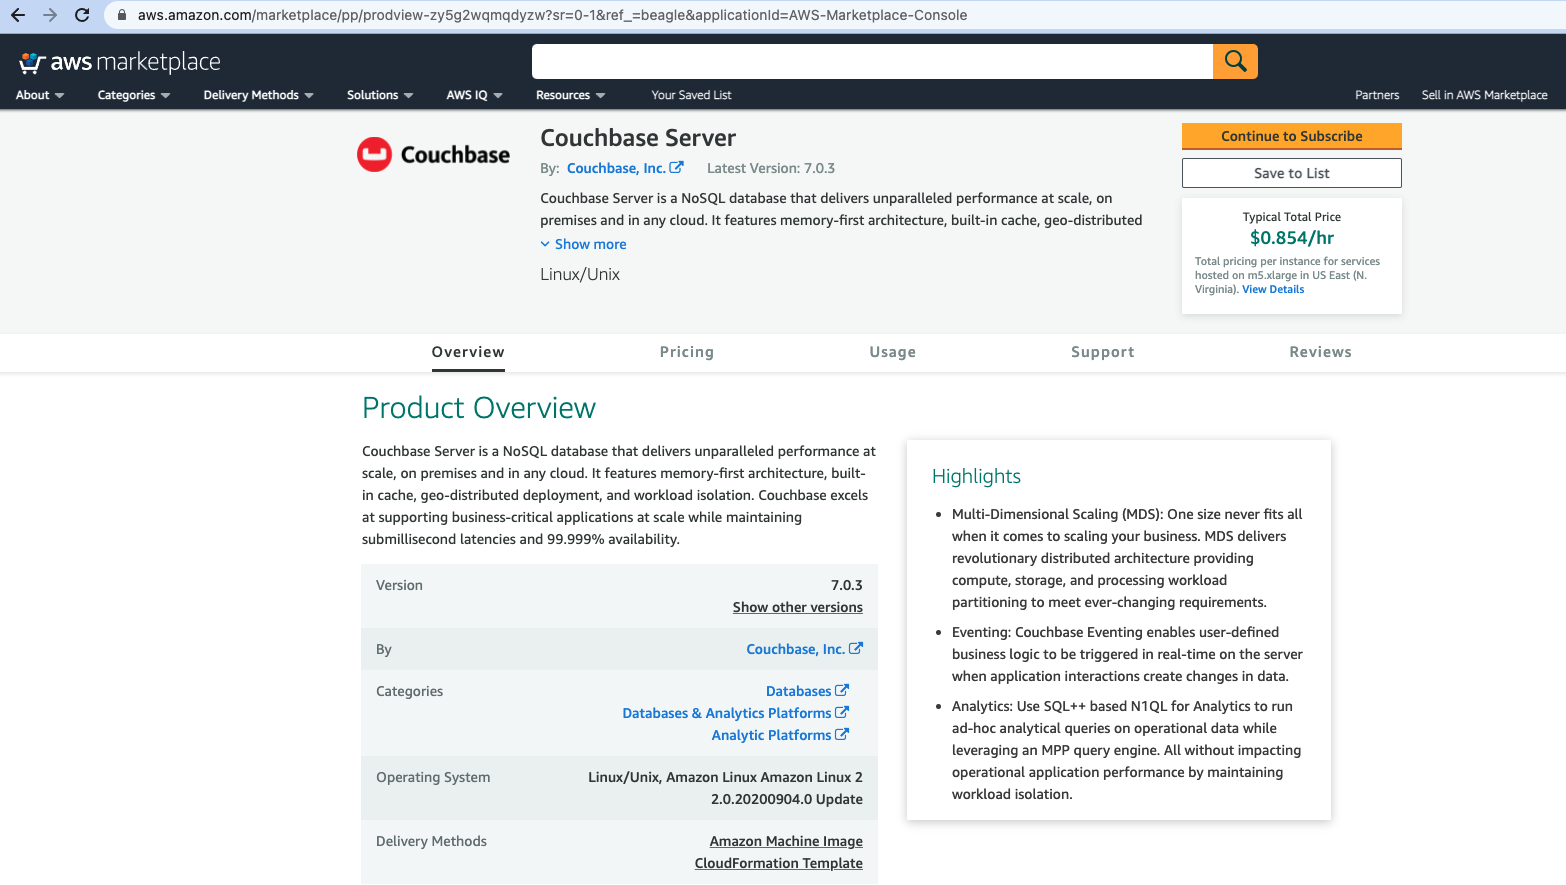 aws marketplace couchbase ee